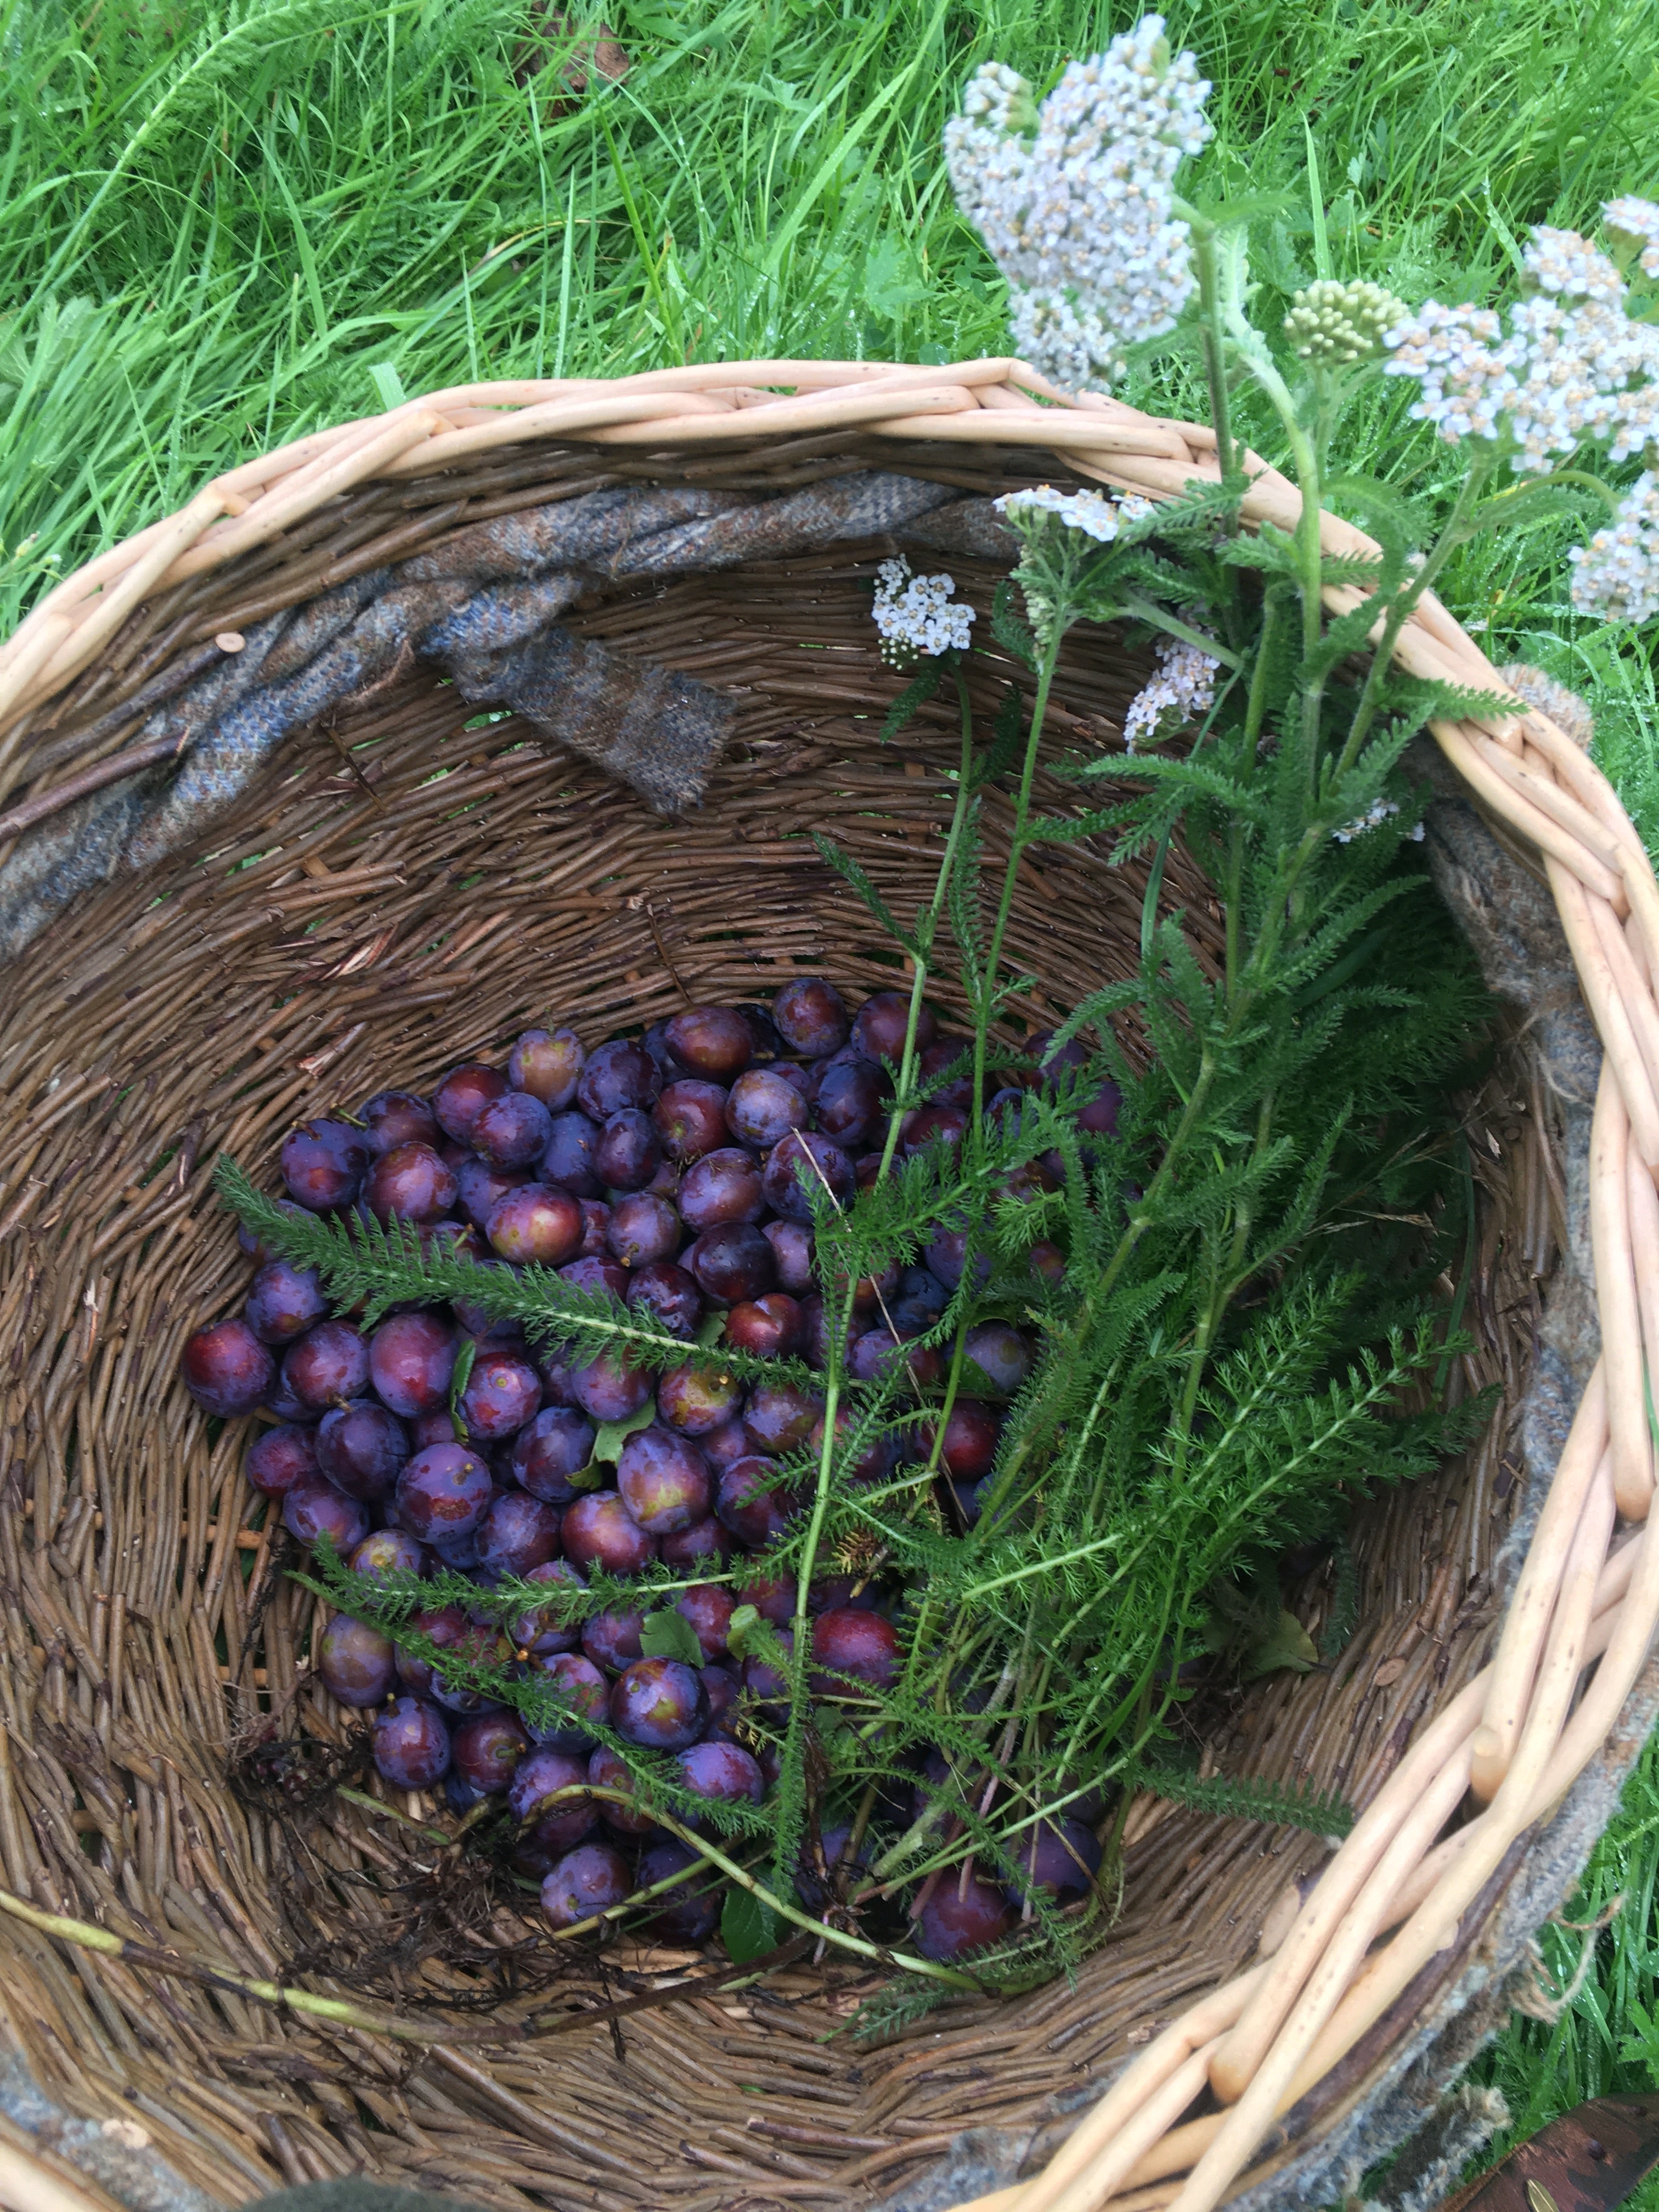 Full Day Foraging Course Voucher - posted